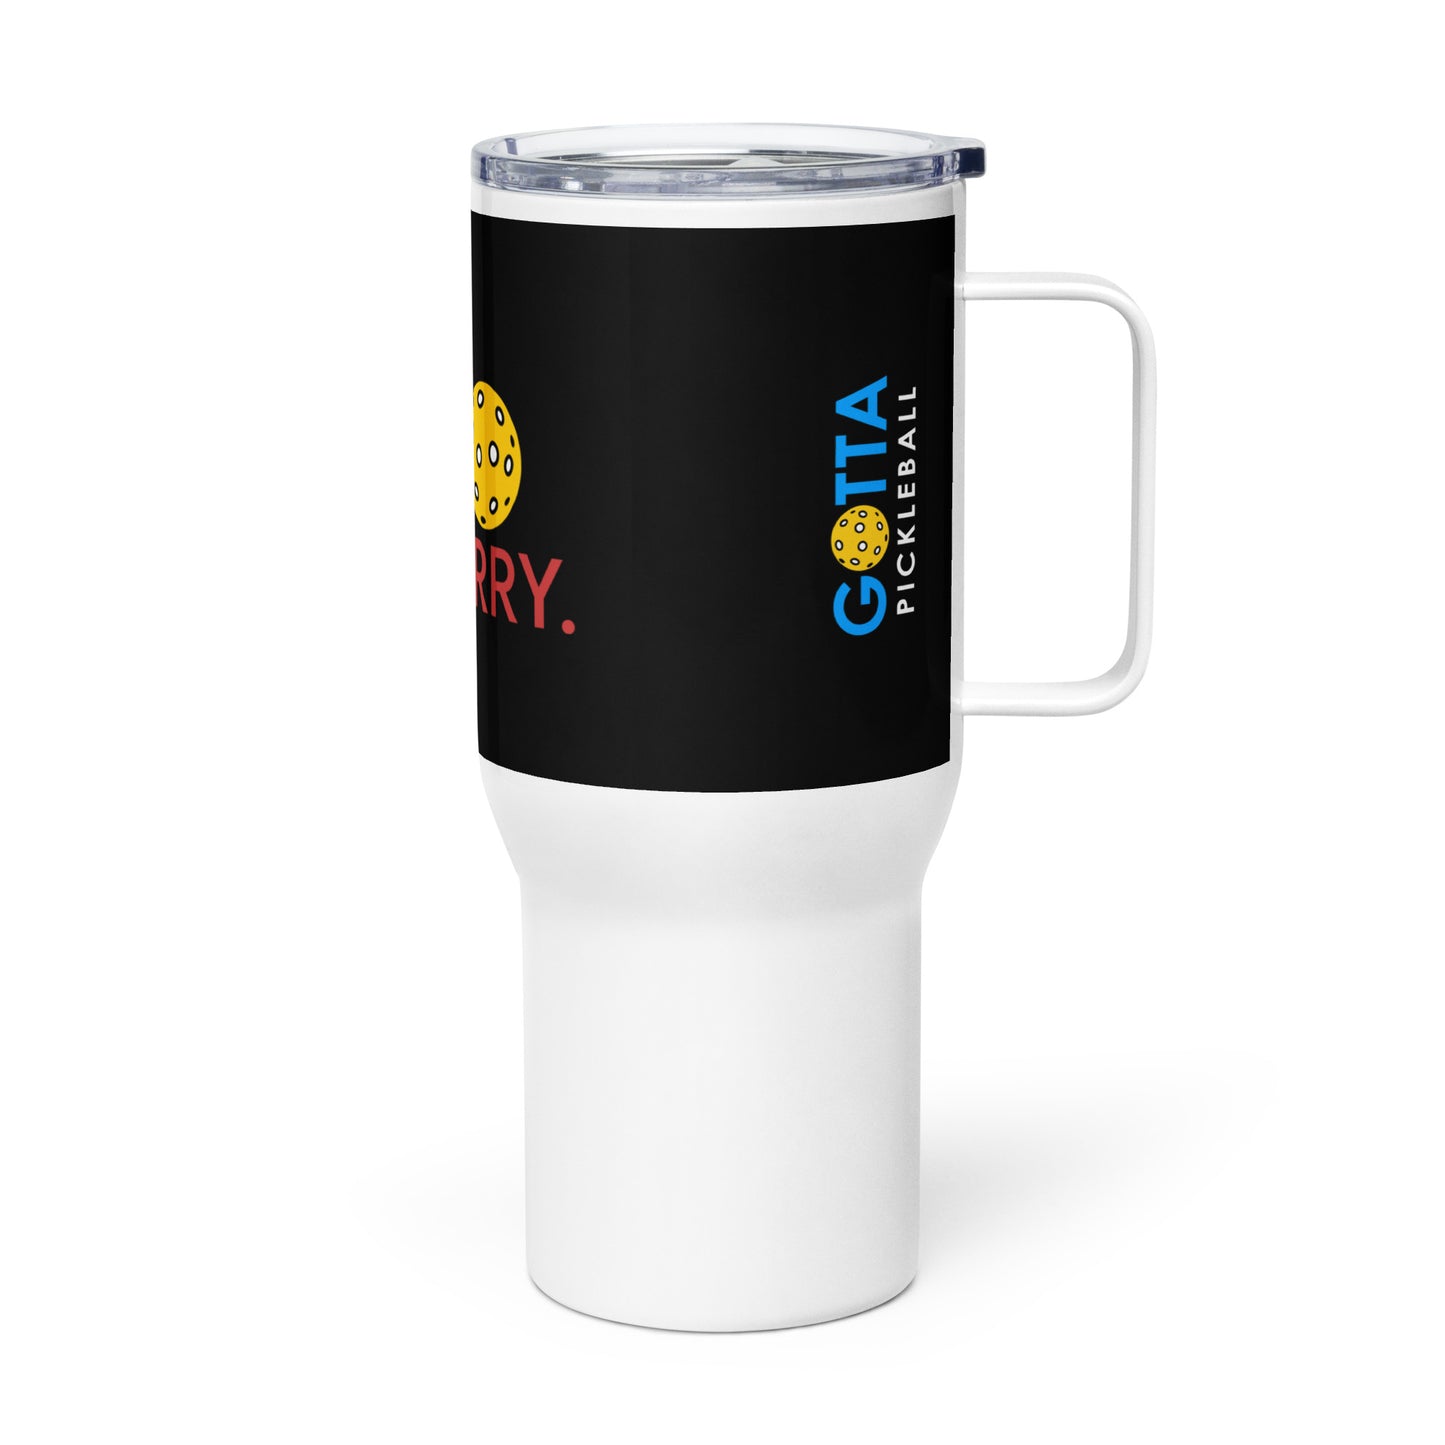 Travel mug with handle: Eat. Dink. Be Merry with Pickleball